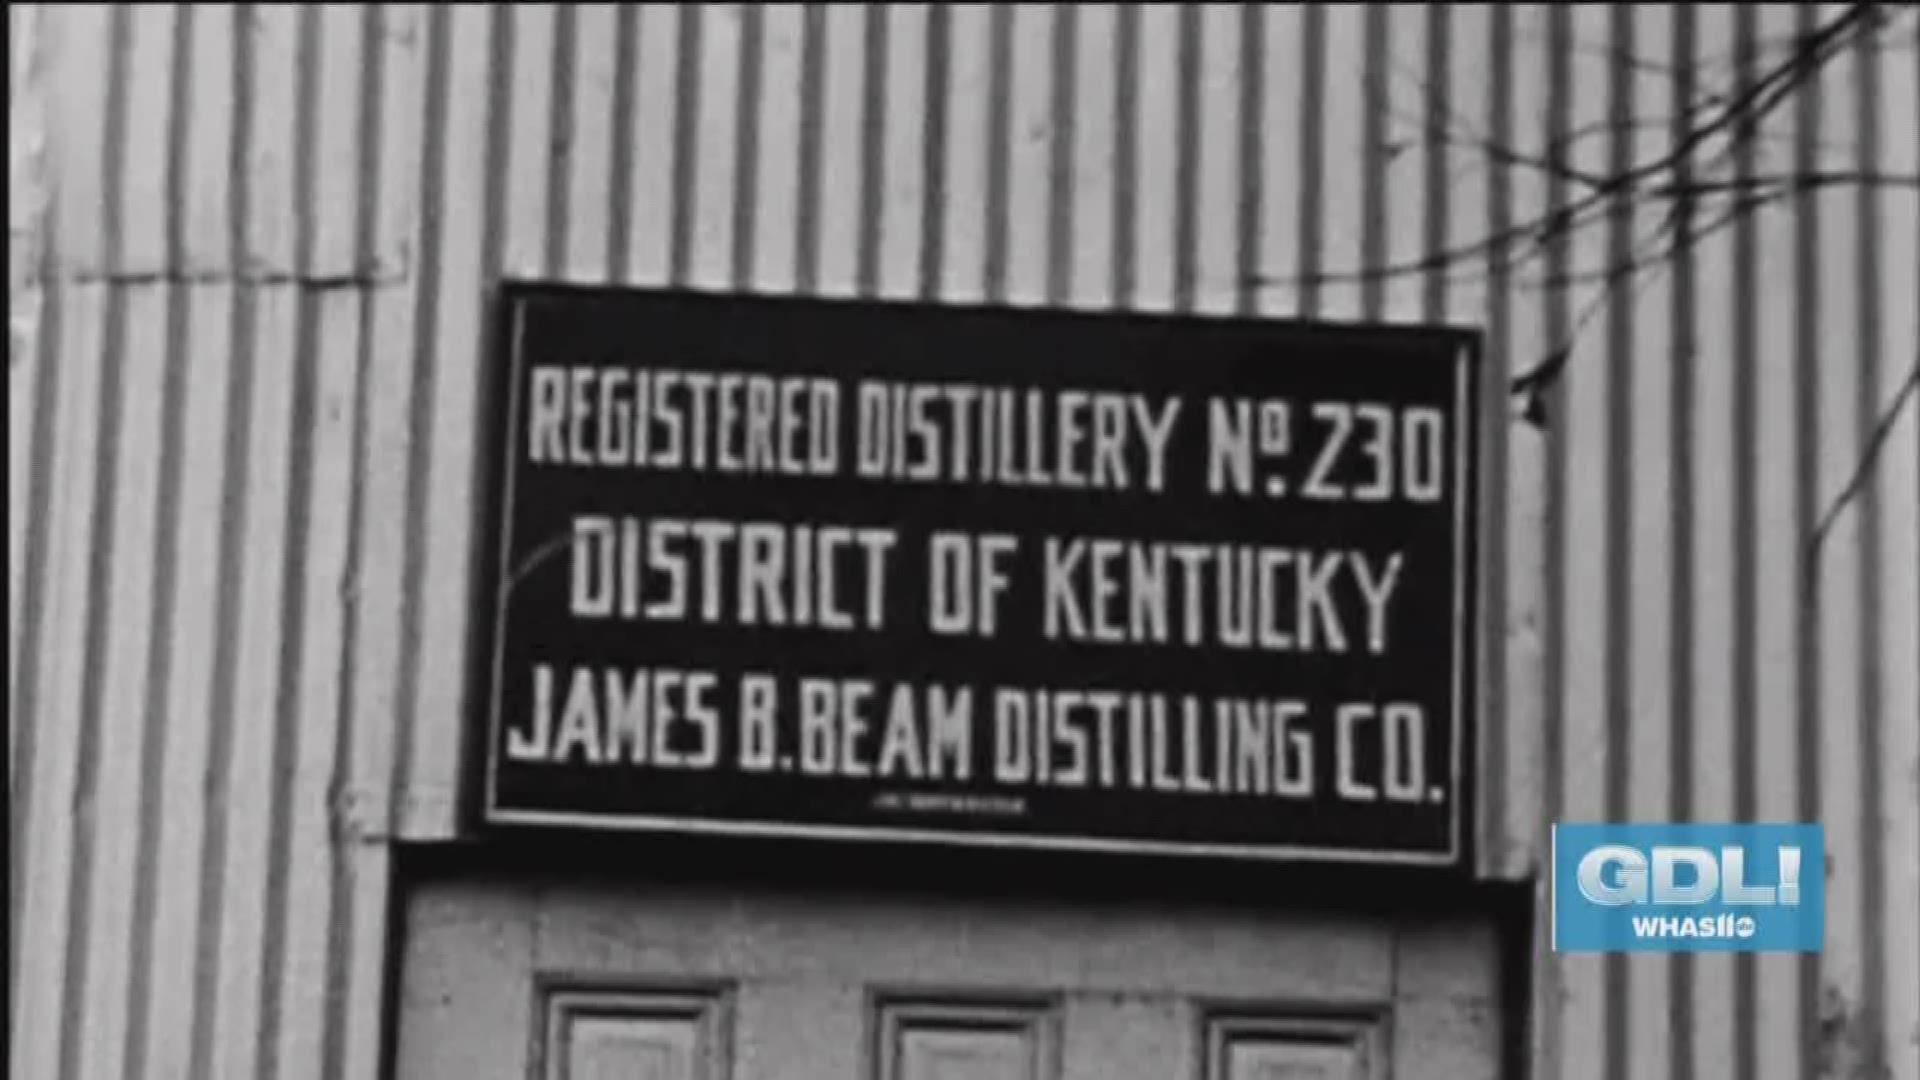 Jim Beam Master Distiller Fred Noe comes from a family with strong ties to Kentucky history. He stopped by Great Day Live to show some rare footage of his grandfather, Jim Beam, along with one-of-kind artifacts his family has collected over the years.